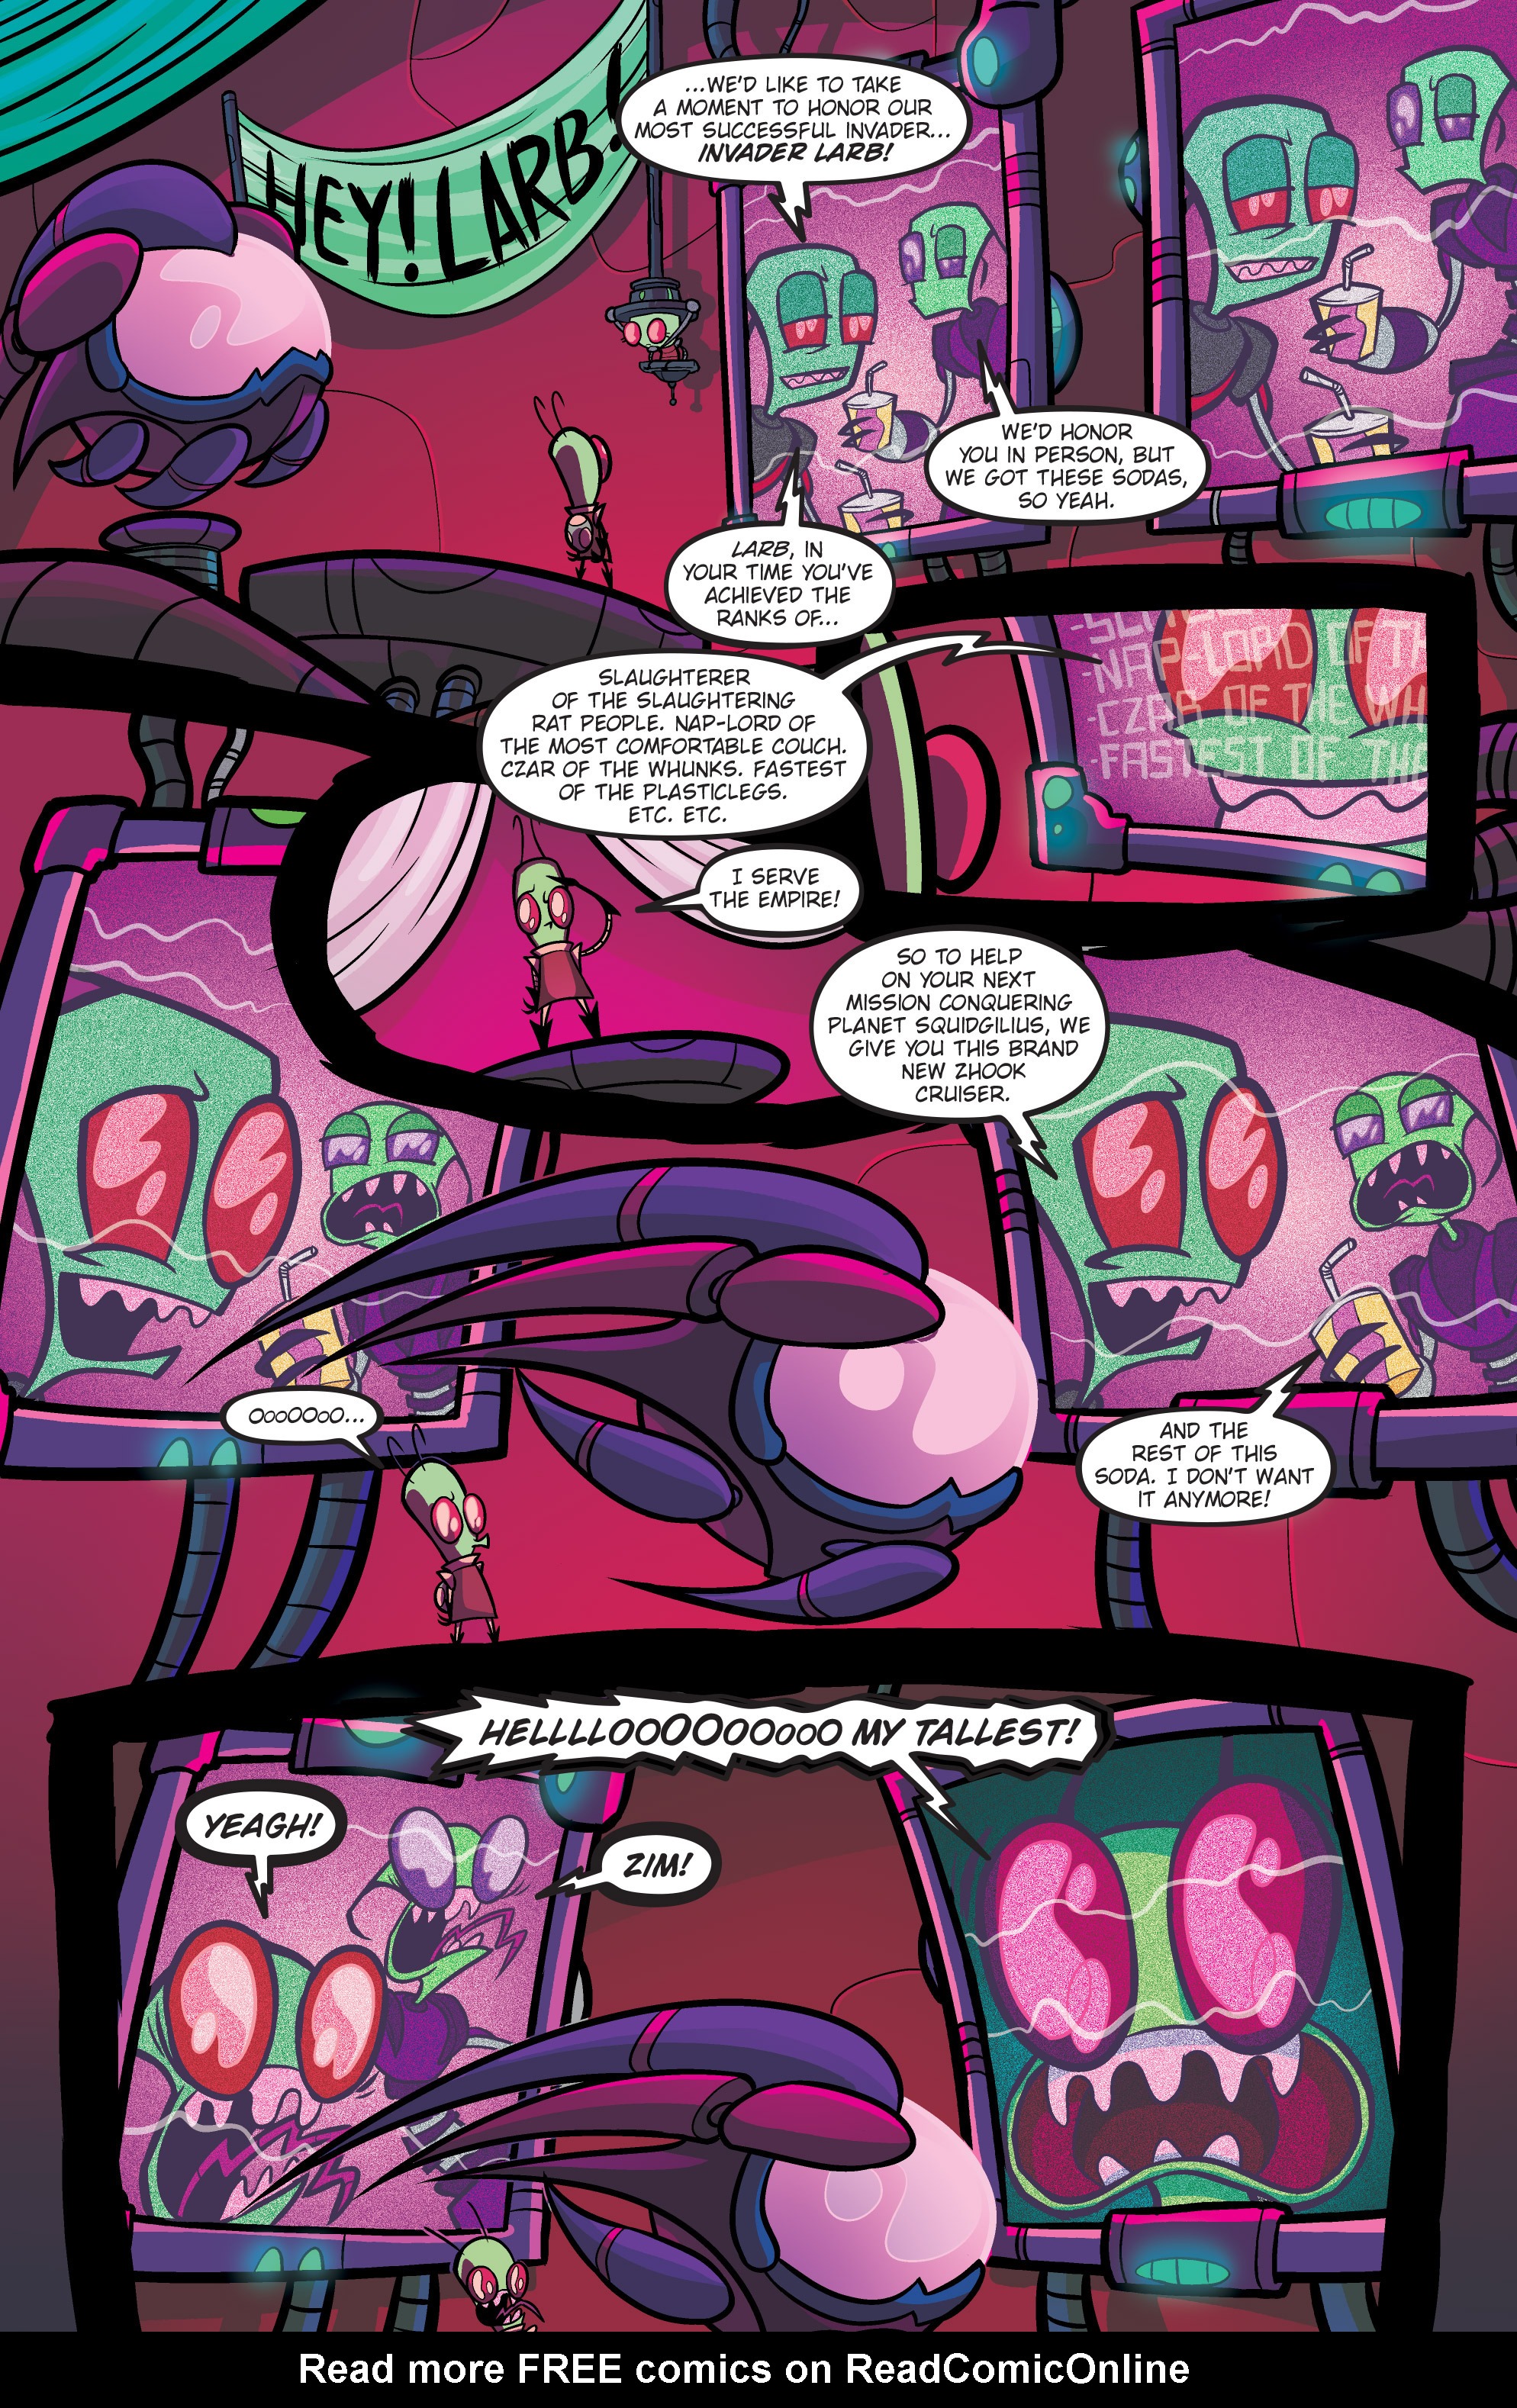 Invader Zim Issue 18 | Read Invader Zim Issue 18 comic online in high  quality. Read Full Comic online for free - Read comics online in high  quality .|viewcomiconline.com